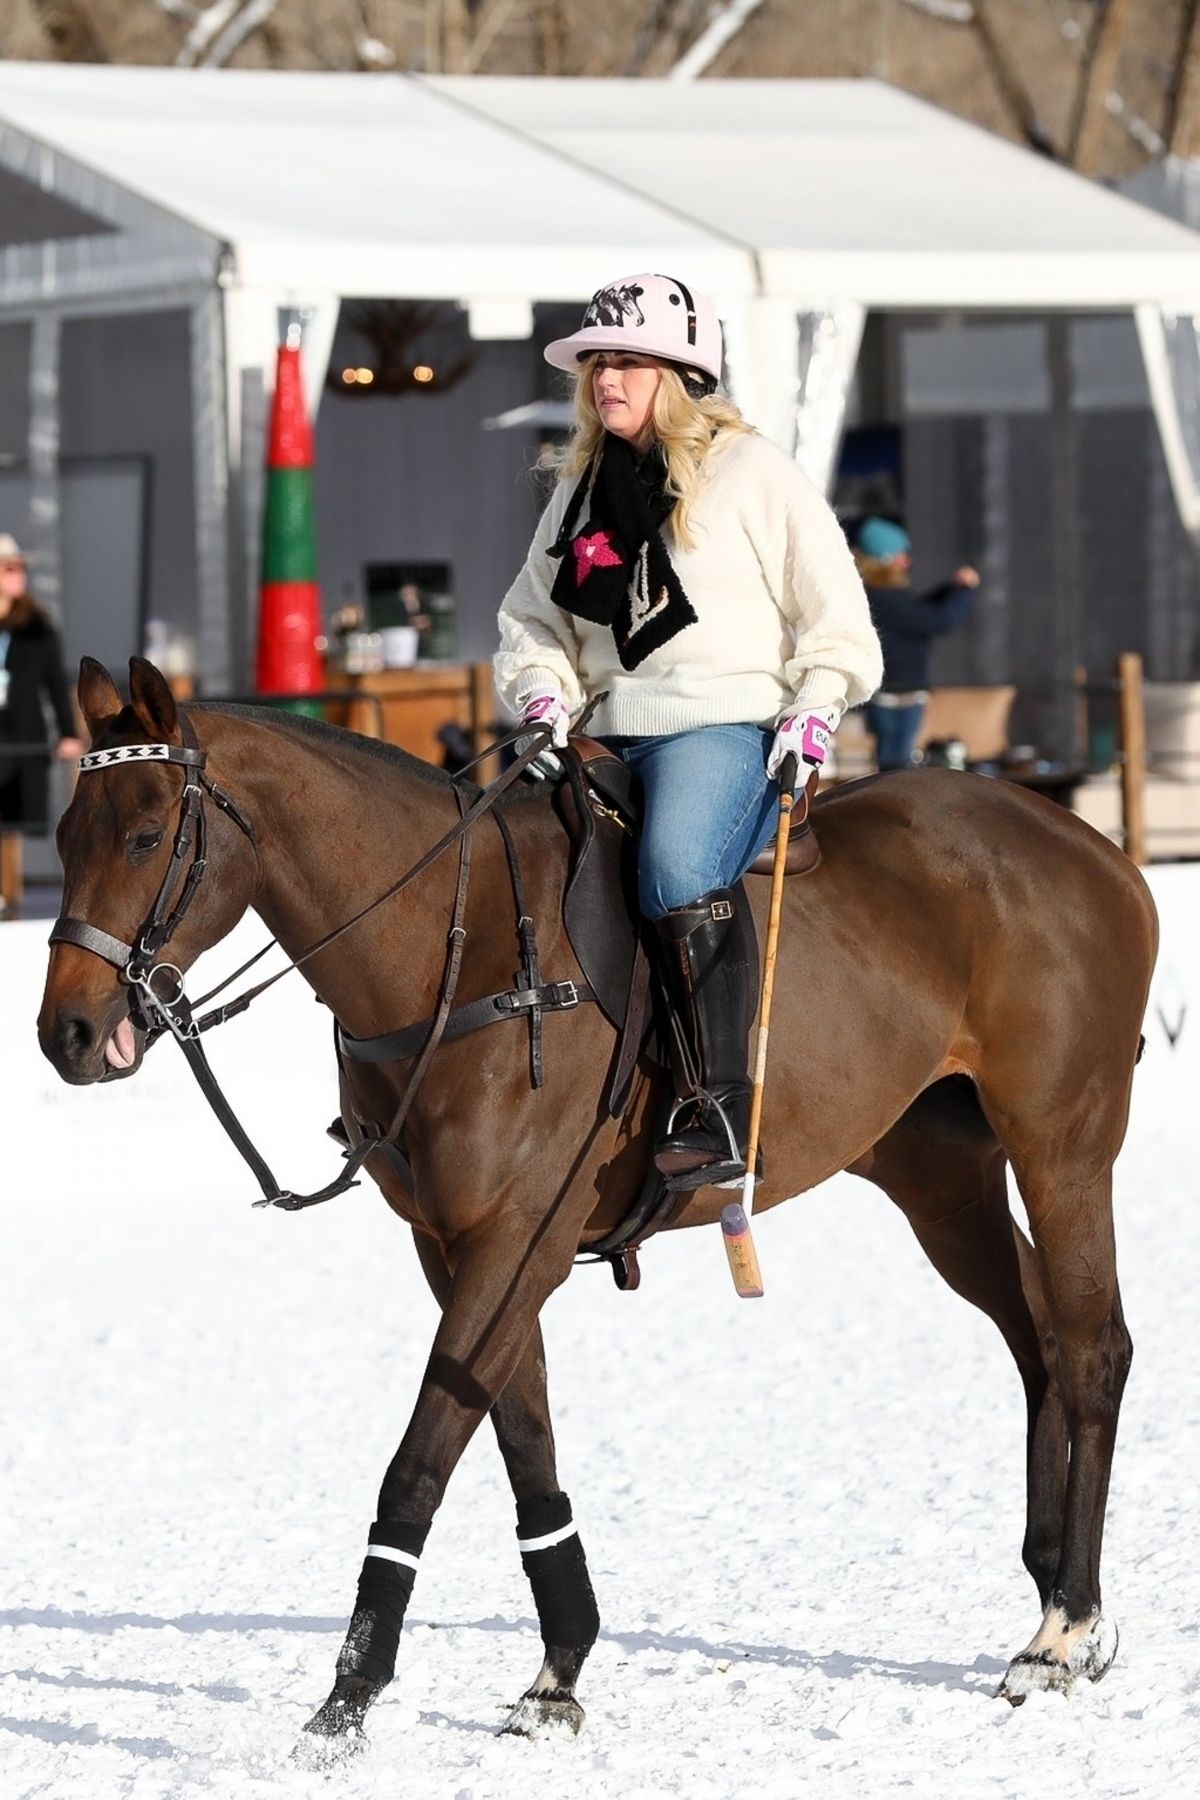 rebel-wilson-playing-polo-on-vacation-in-aspen-12-19-2020-4.jpg